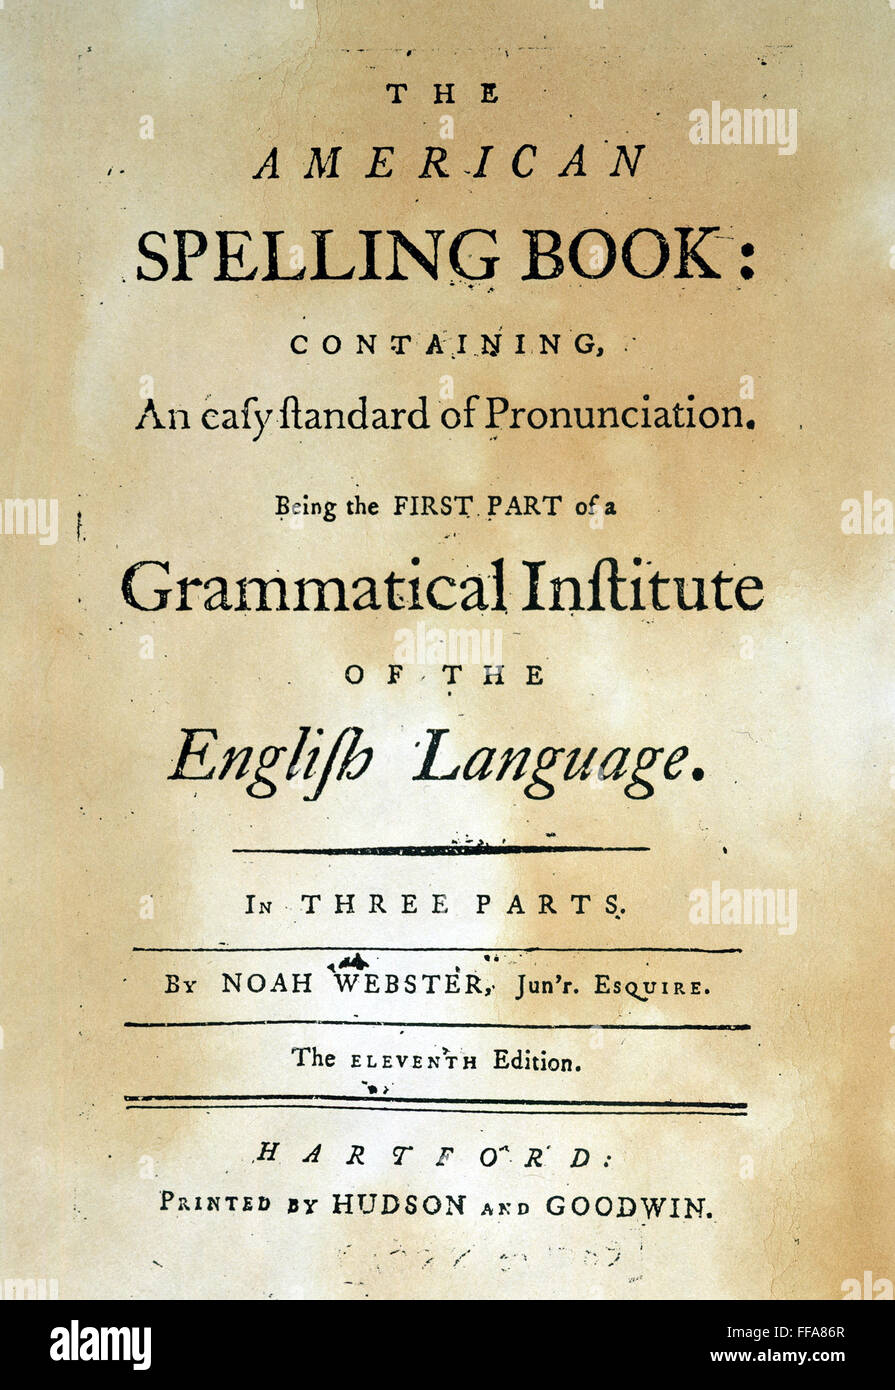 NOAH WEBSTER'S SPELLER. /nThe title-page of the first known edition of Webster's speller, 'The American Spelling Book,' published in 1788. Stock Photo